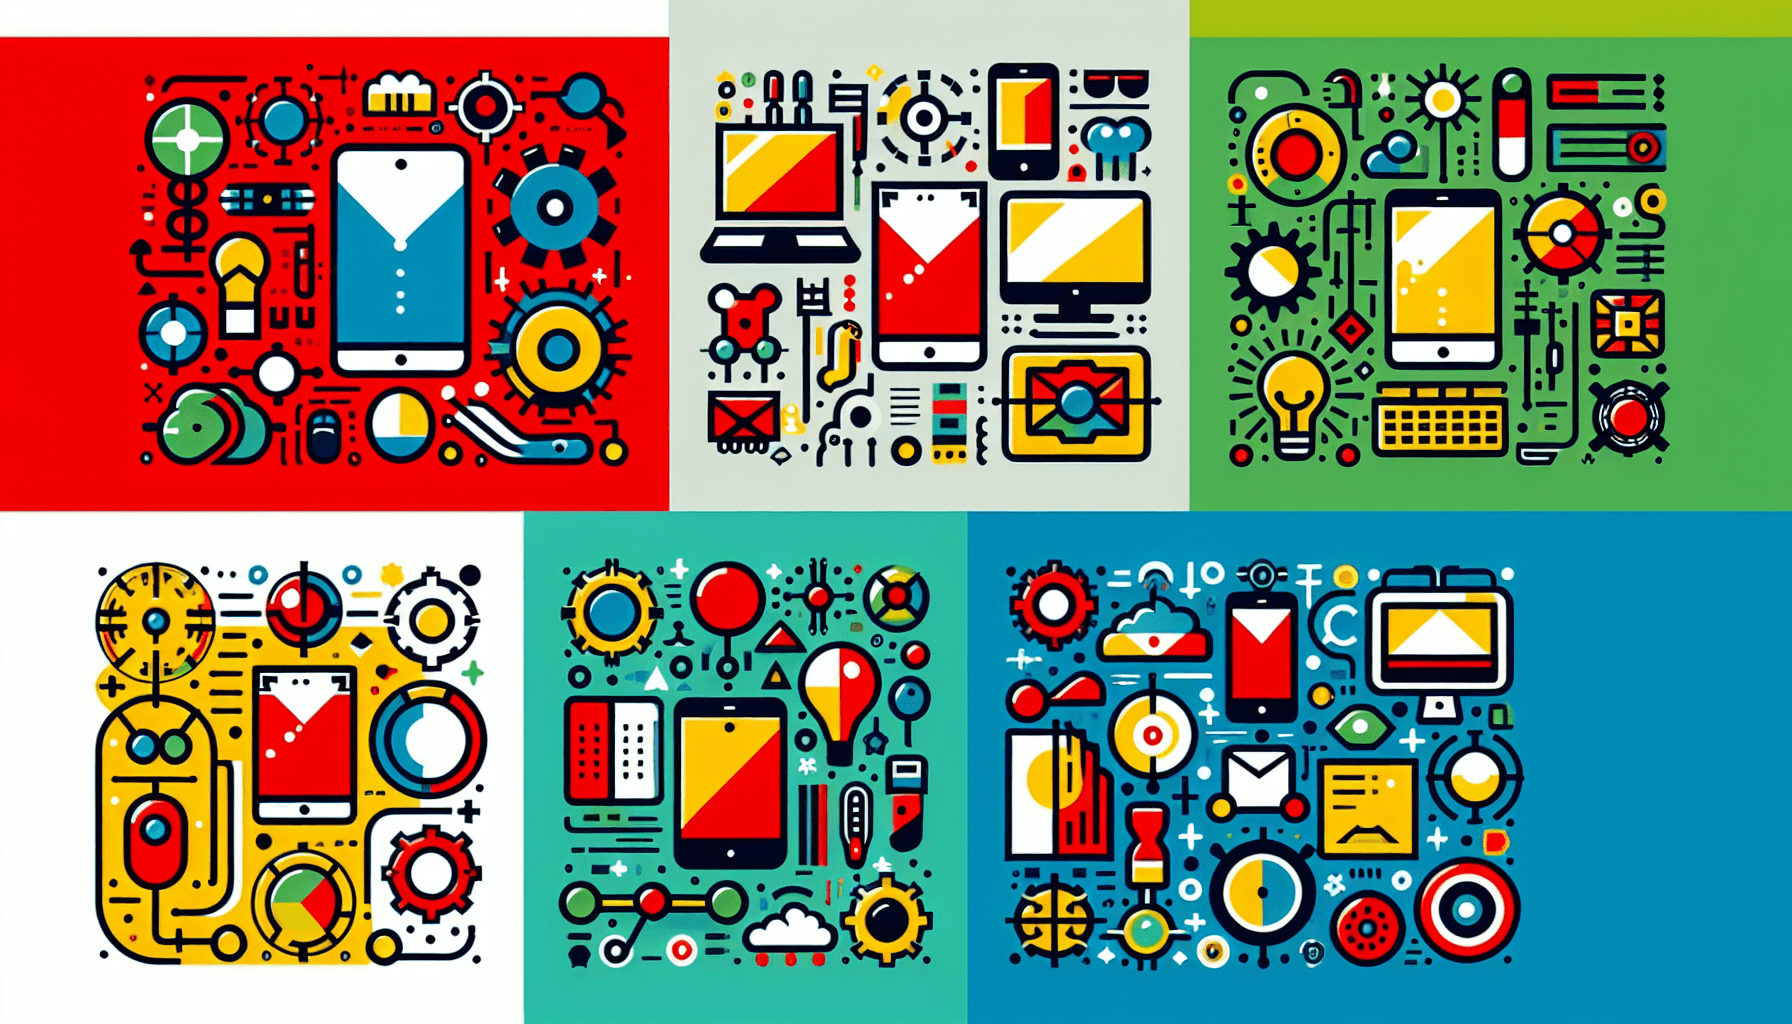 Technology in flat illustration style and white background, red #f47574, green #88c7a8, yellow #fcc44b, and blue #645bc8 colors.